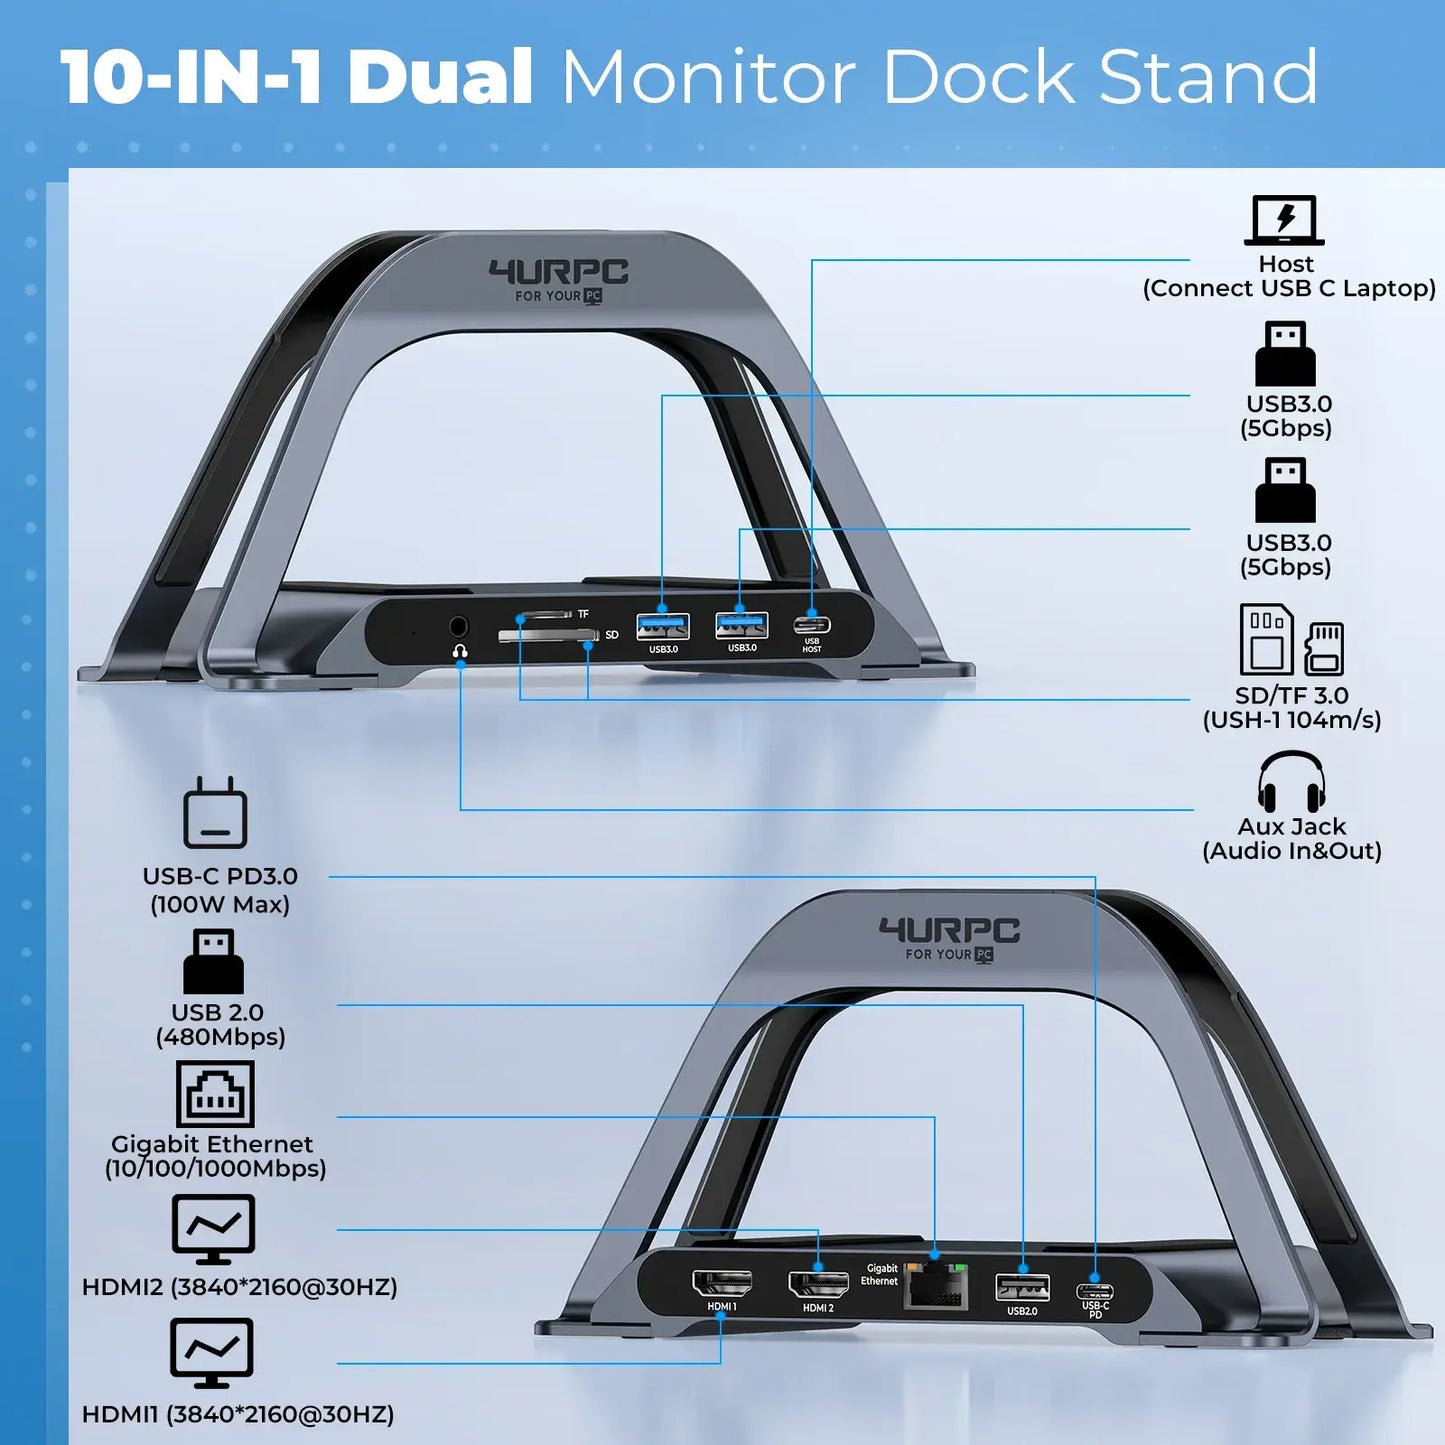 4urpc hu104 docking stand 10 in 1 dual monitor dock stand